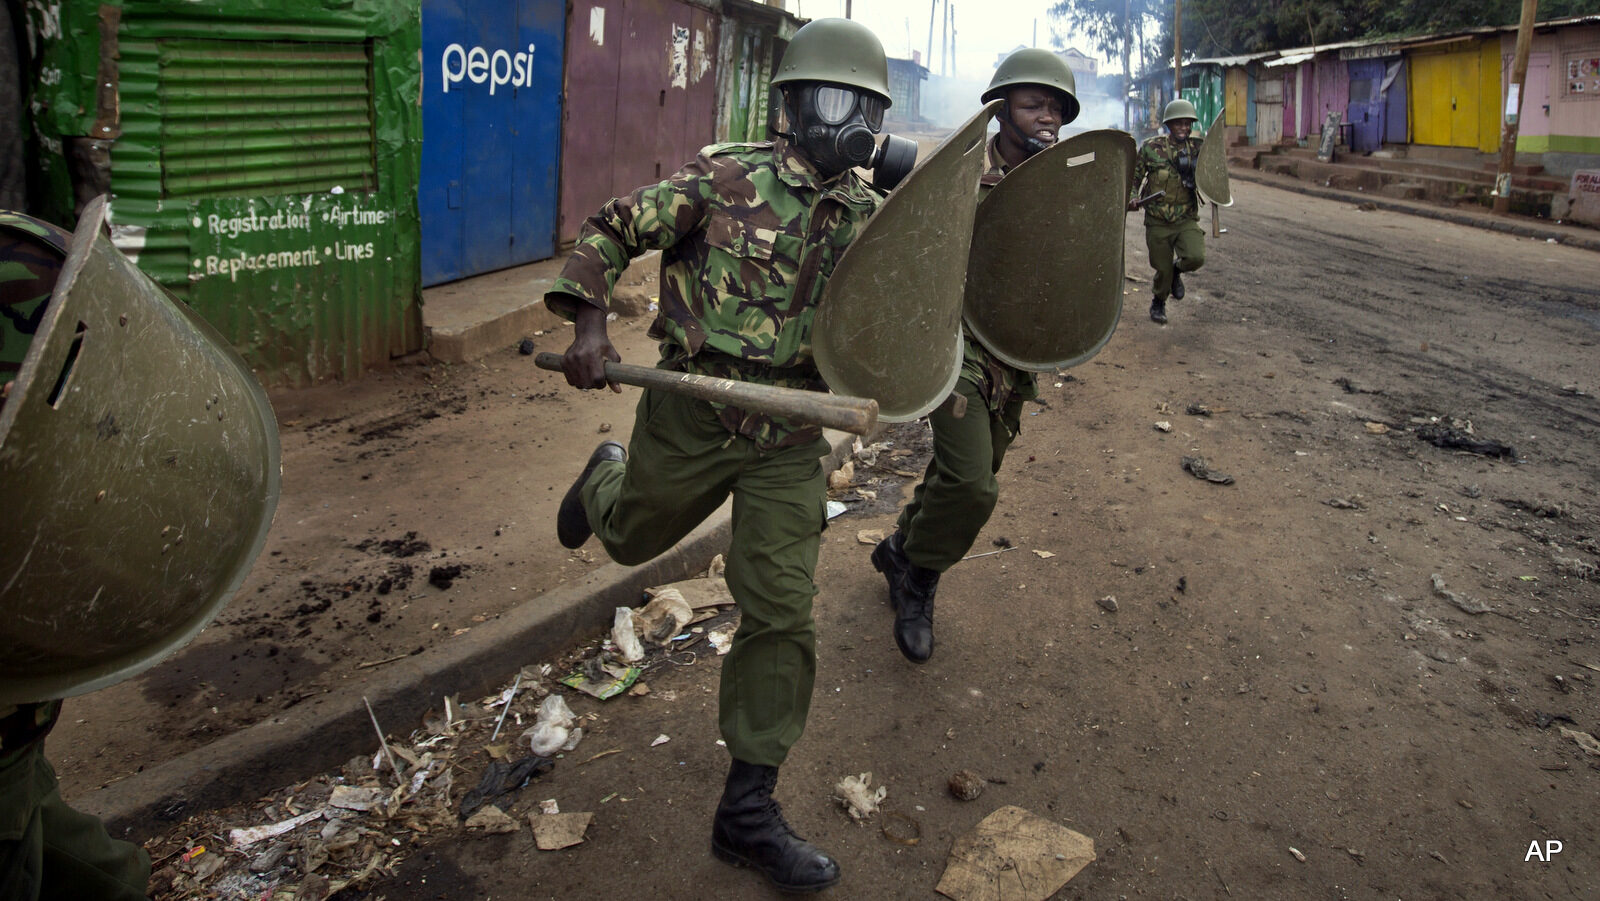 Kenyan police charge as they engage in running battles between police firing tear gas and protesters throwing rocks, in the Kibera slum of Nairobi, Kenya Monday, May 23, 2016. Kenya's police shot, beat and tear gassed opposition demonstrators across the country who tried to gather to call for the electoral commission to be dissolved due to allegations of bias and corruption. (AP Photo/Ben Curtis)